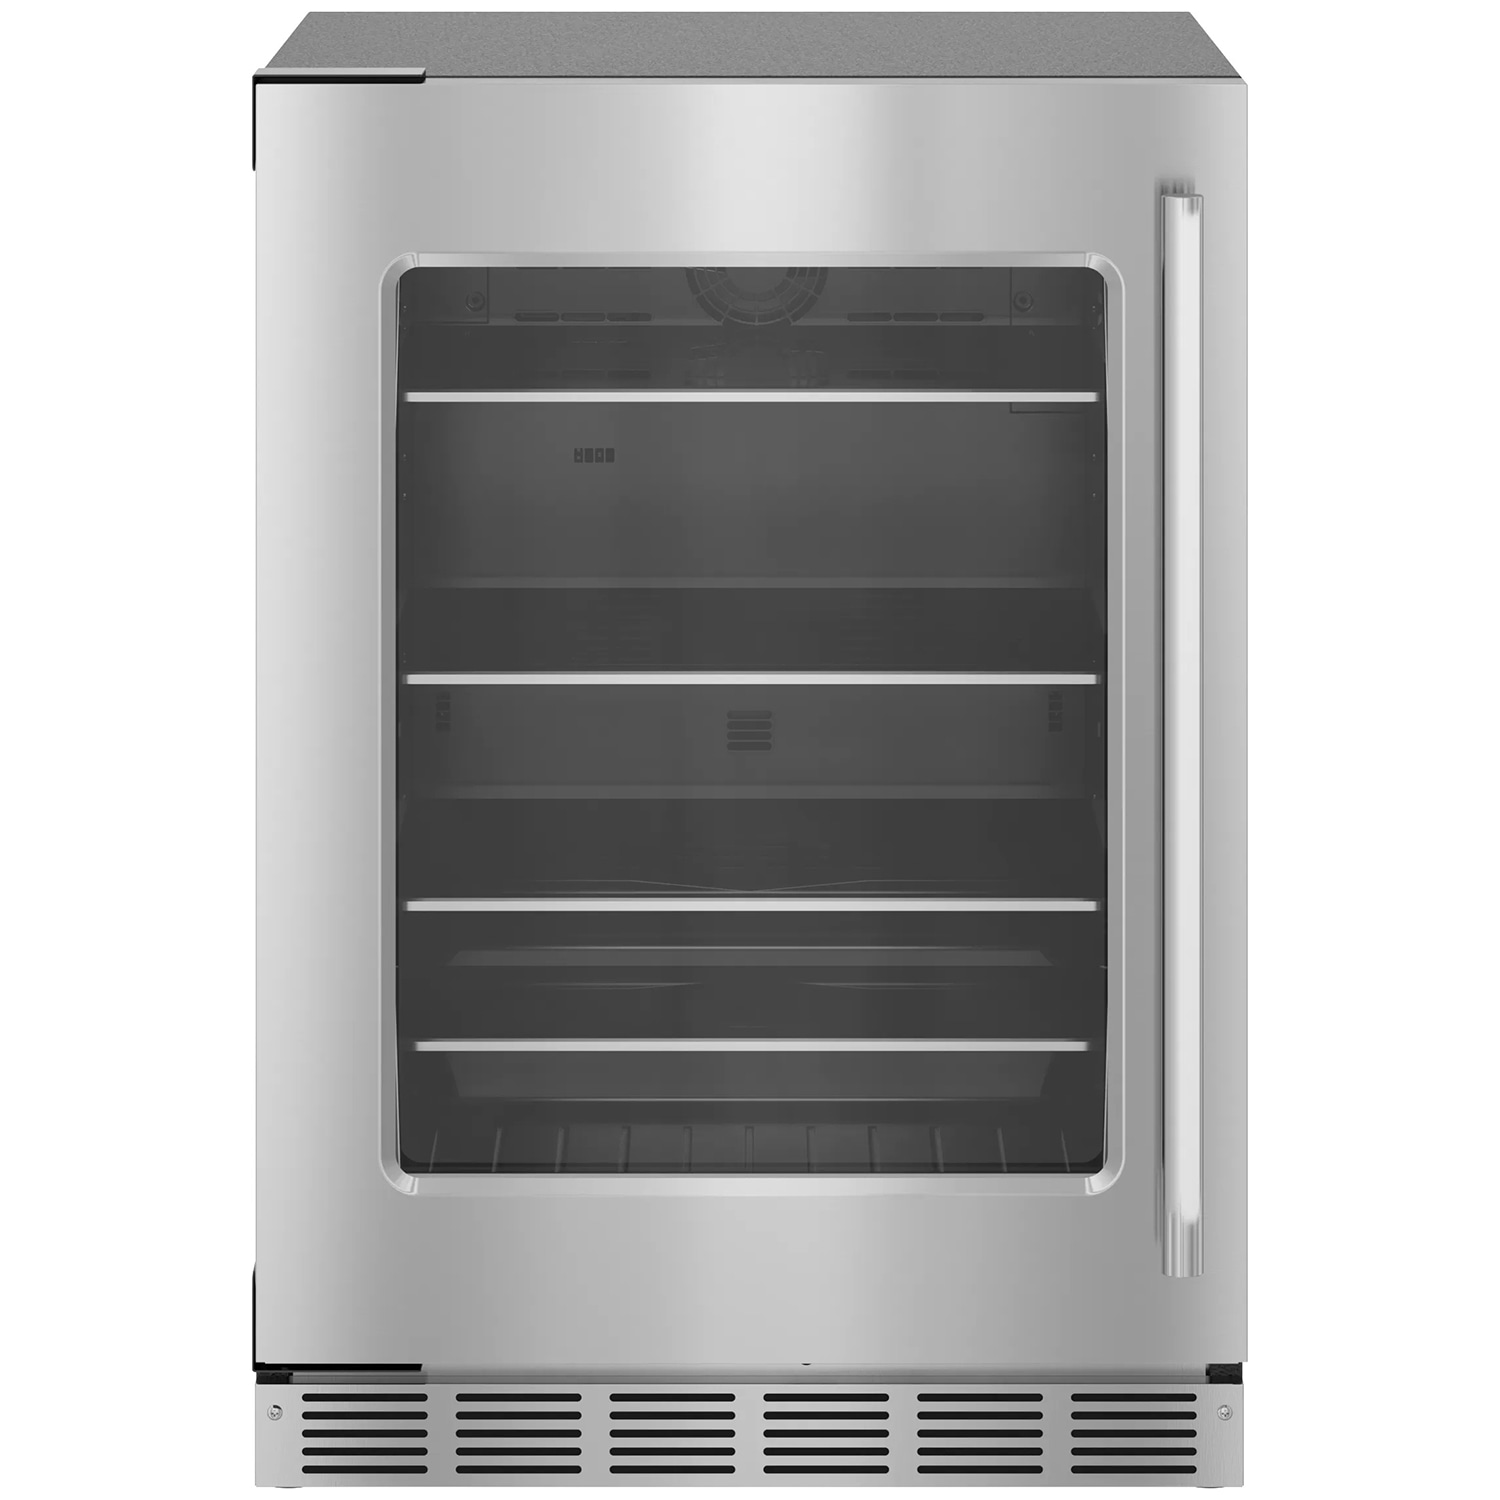 Thermador Masterpiece Series 24" Built-In 4.9 Cu. Ft. Compact Counter Depth Refrigerator (No Freezer Included) - Stainless Steel (T24UR915LS)